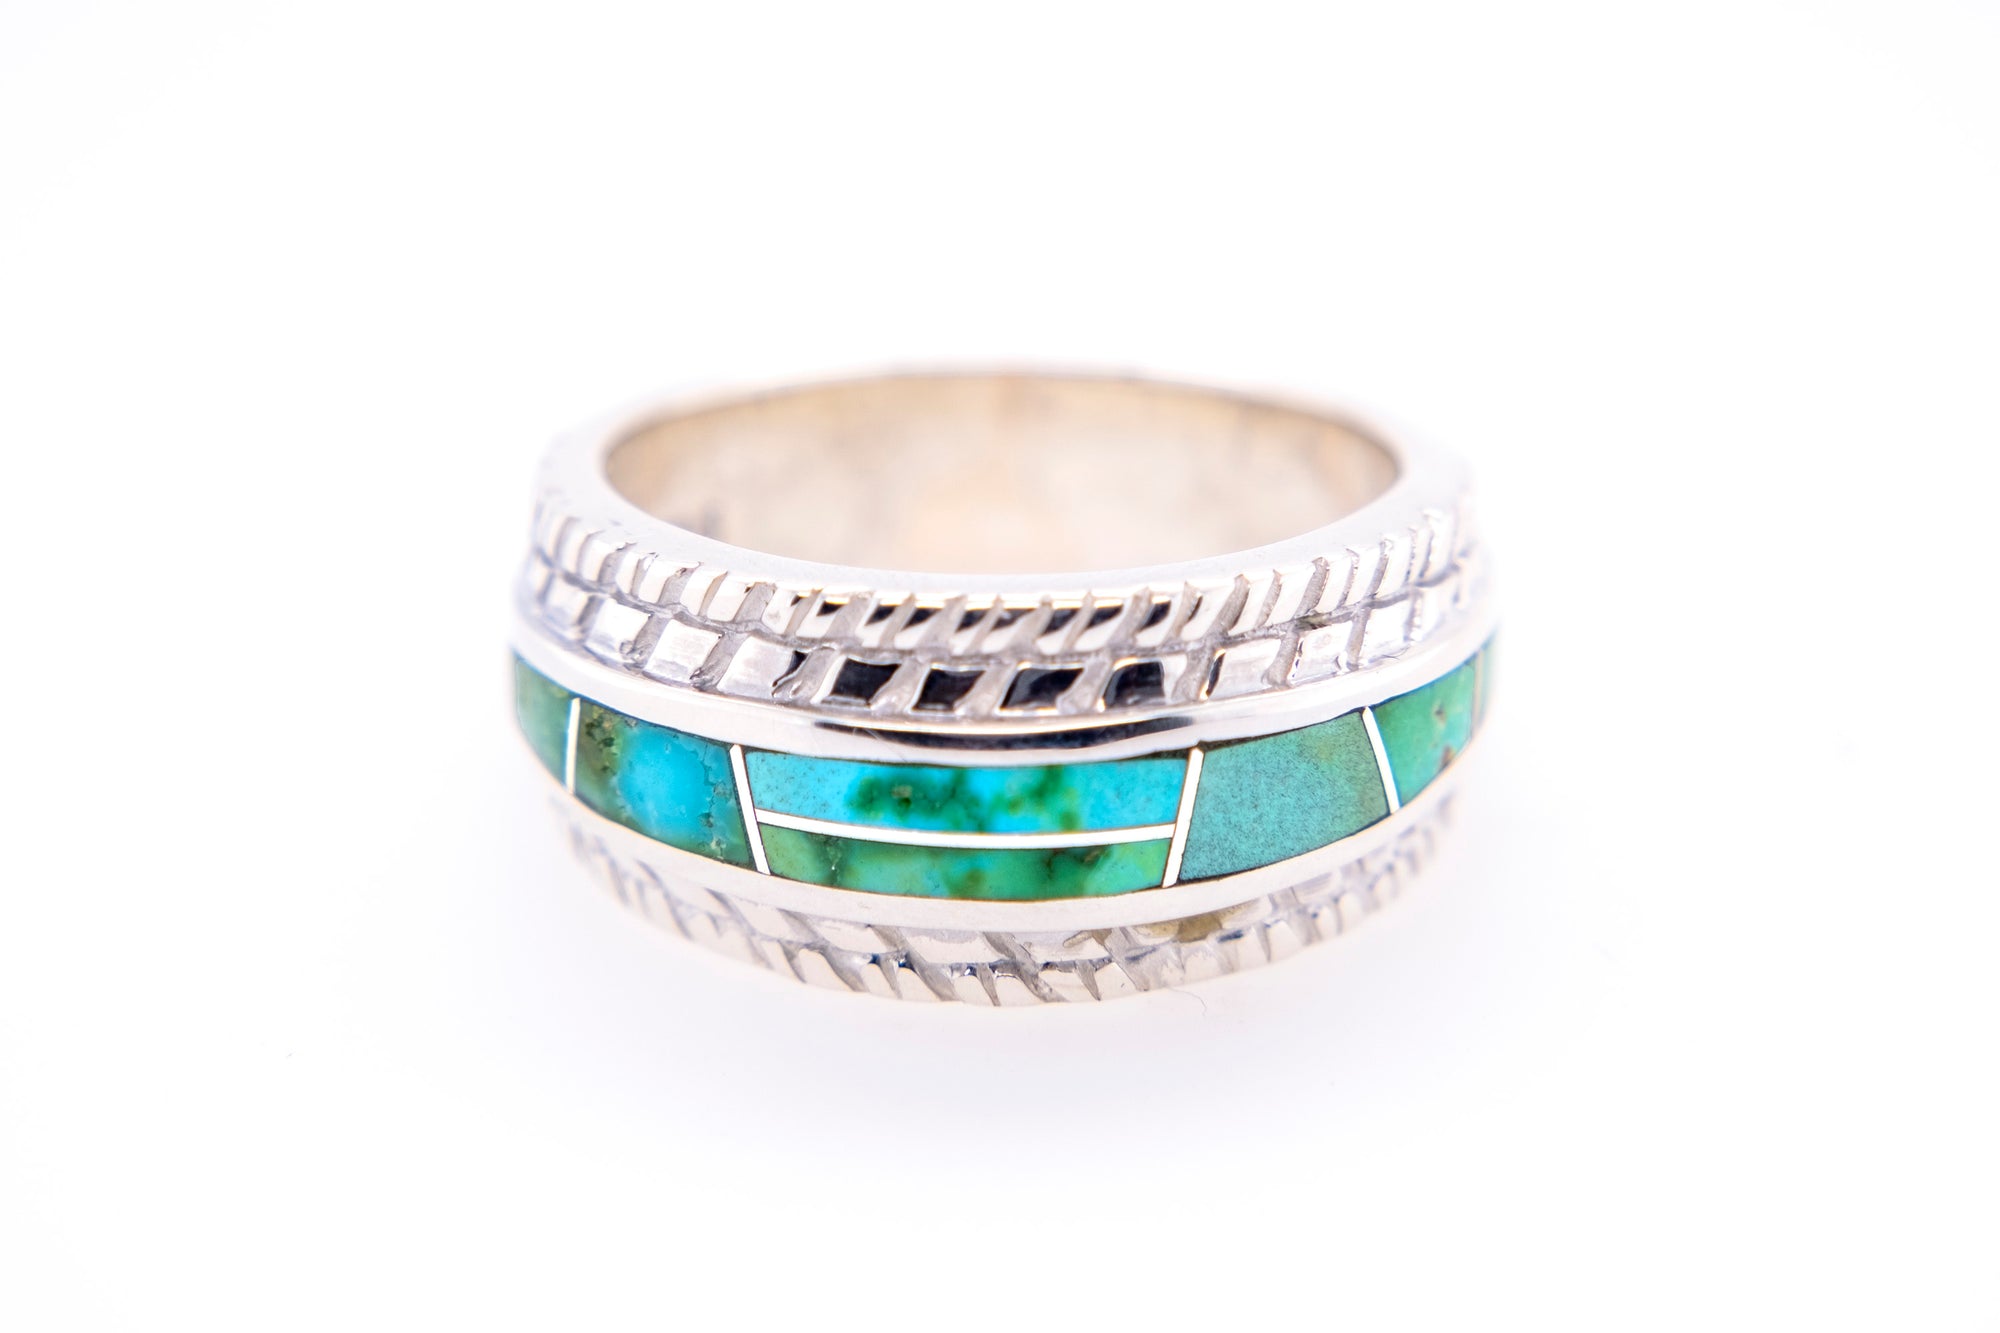 David Rosales Tire-Track Sonoran Turquoise Ring - Side